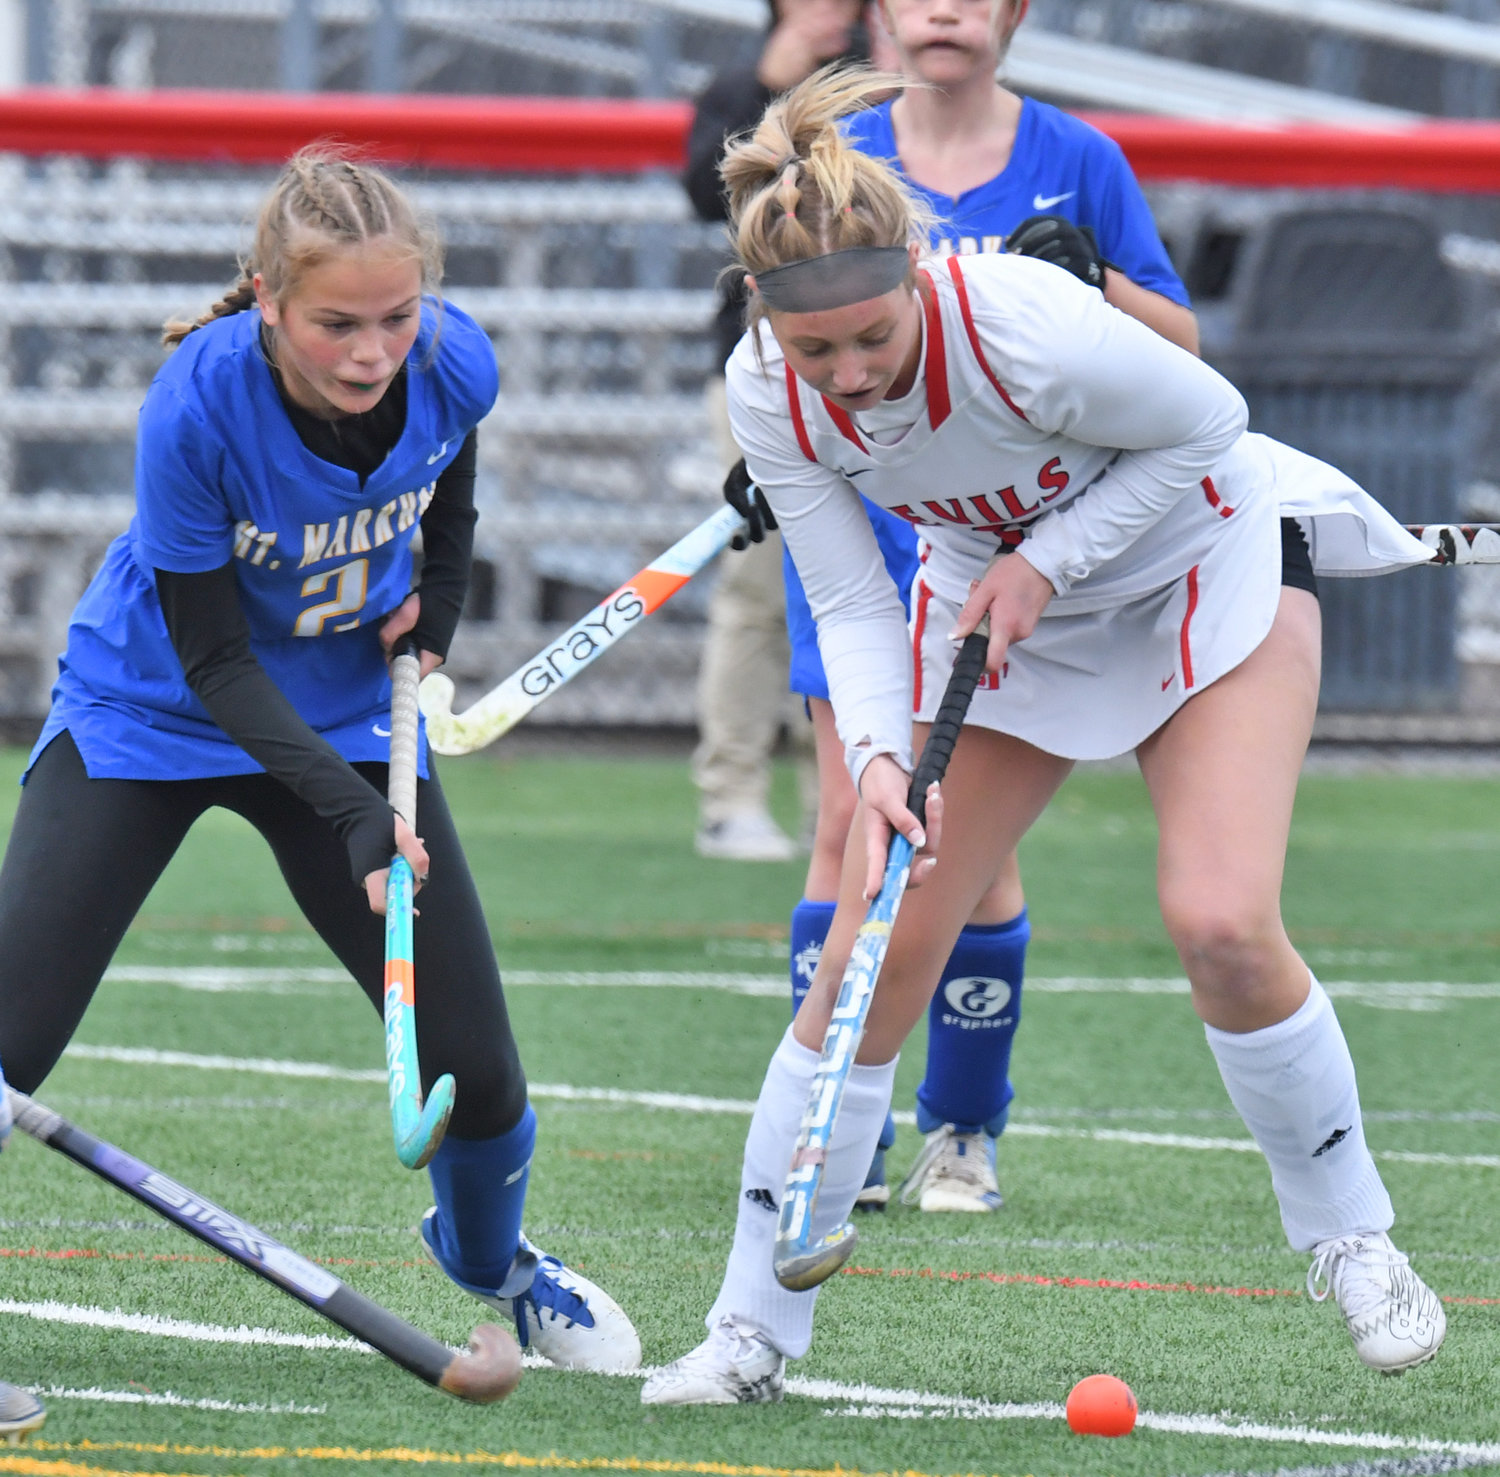 Vernon-Verona-Sherrill’s Carmella Garcia, right, controls the ball in front of Mount Markham’s Haley Otis in the first quarter of the teams’ Section III Class C quarterfinal game Thursday afternoon in Verona. Garcia scored two first half goals and the Red Devils won 3-0.